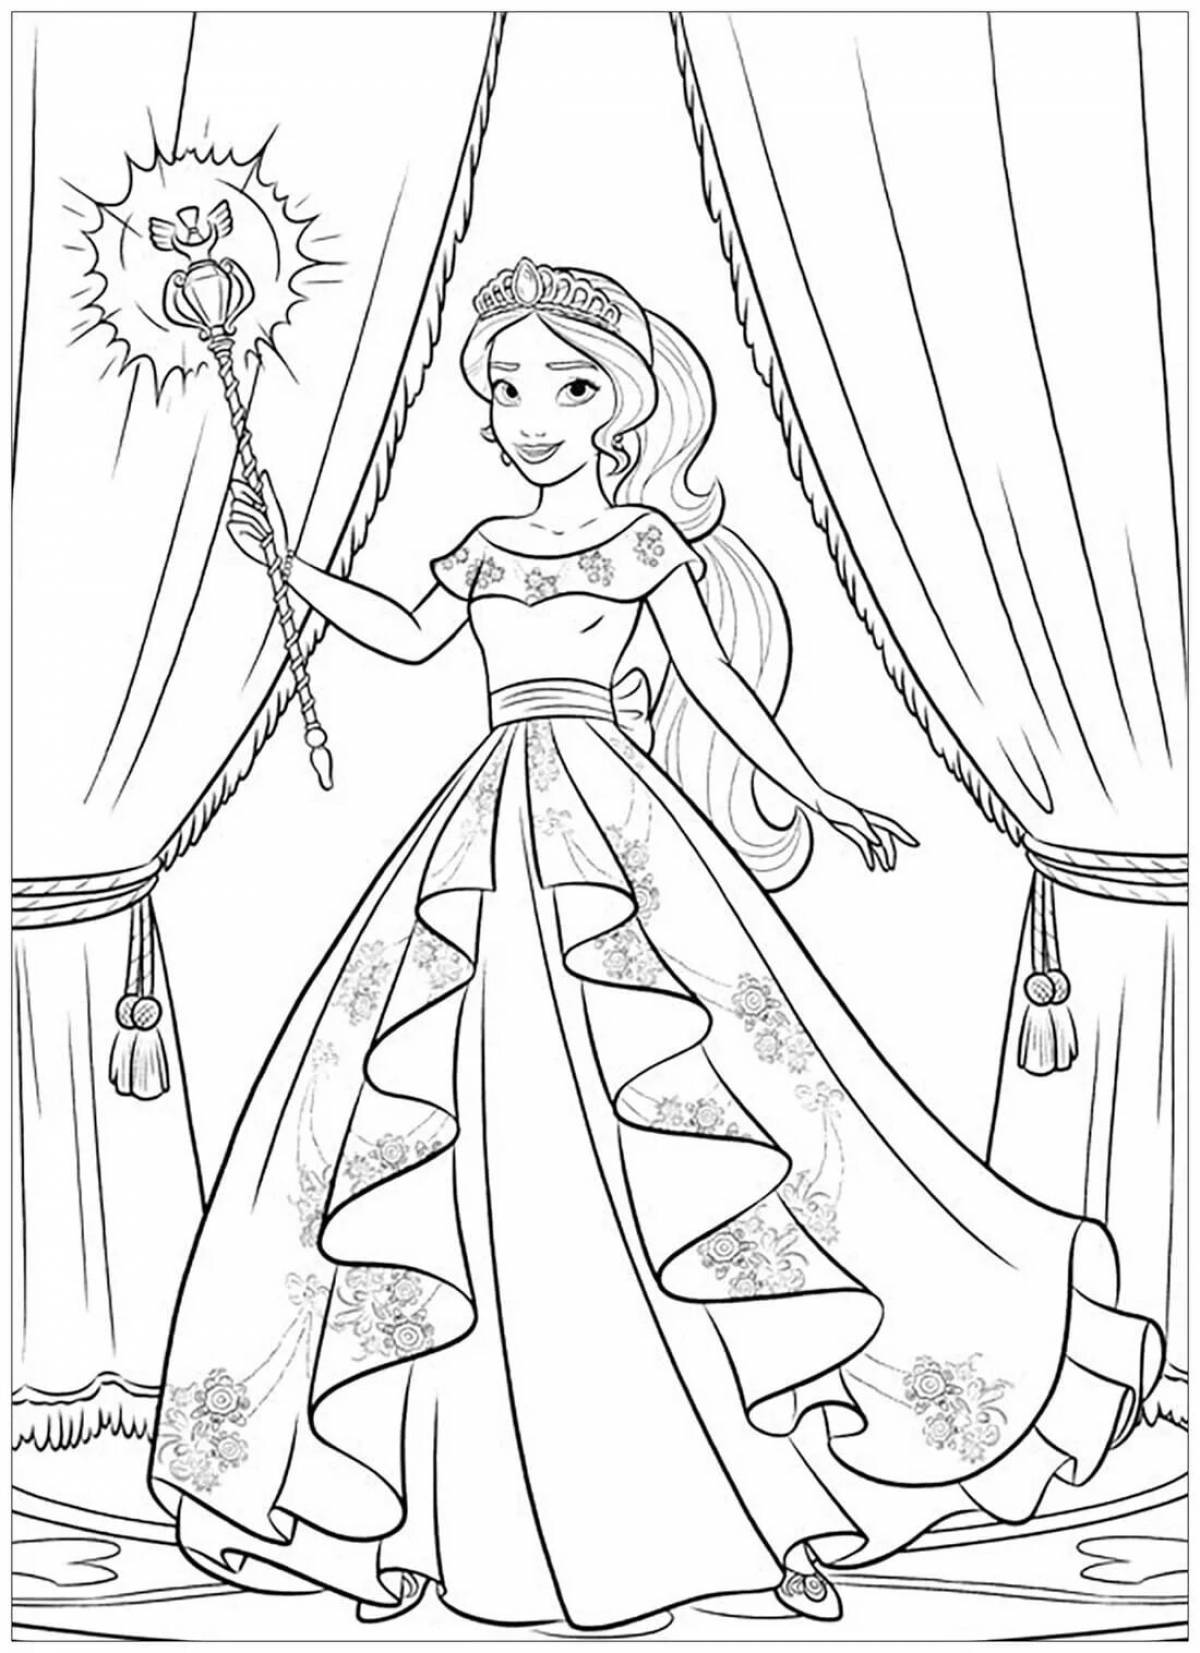 Exciting elena of avalor coloring book